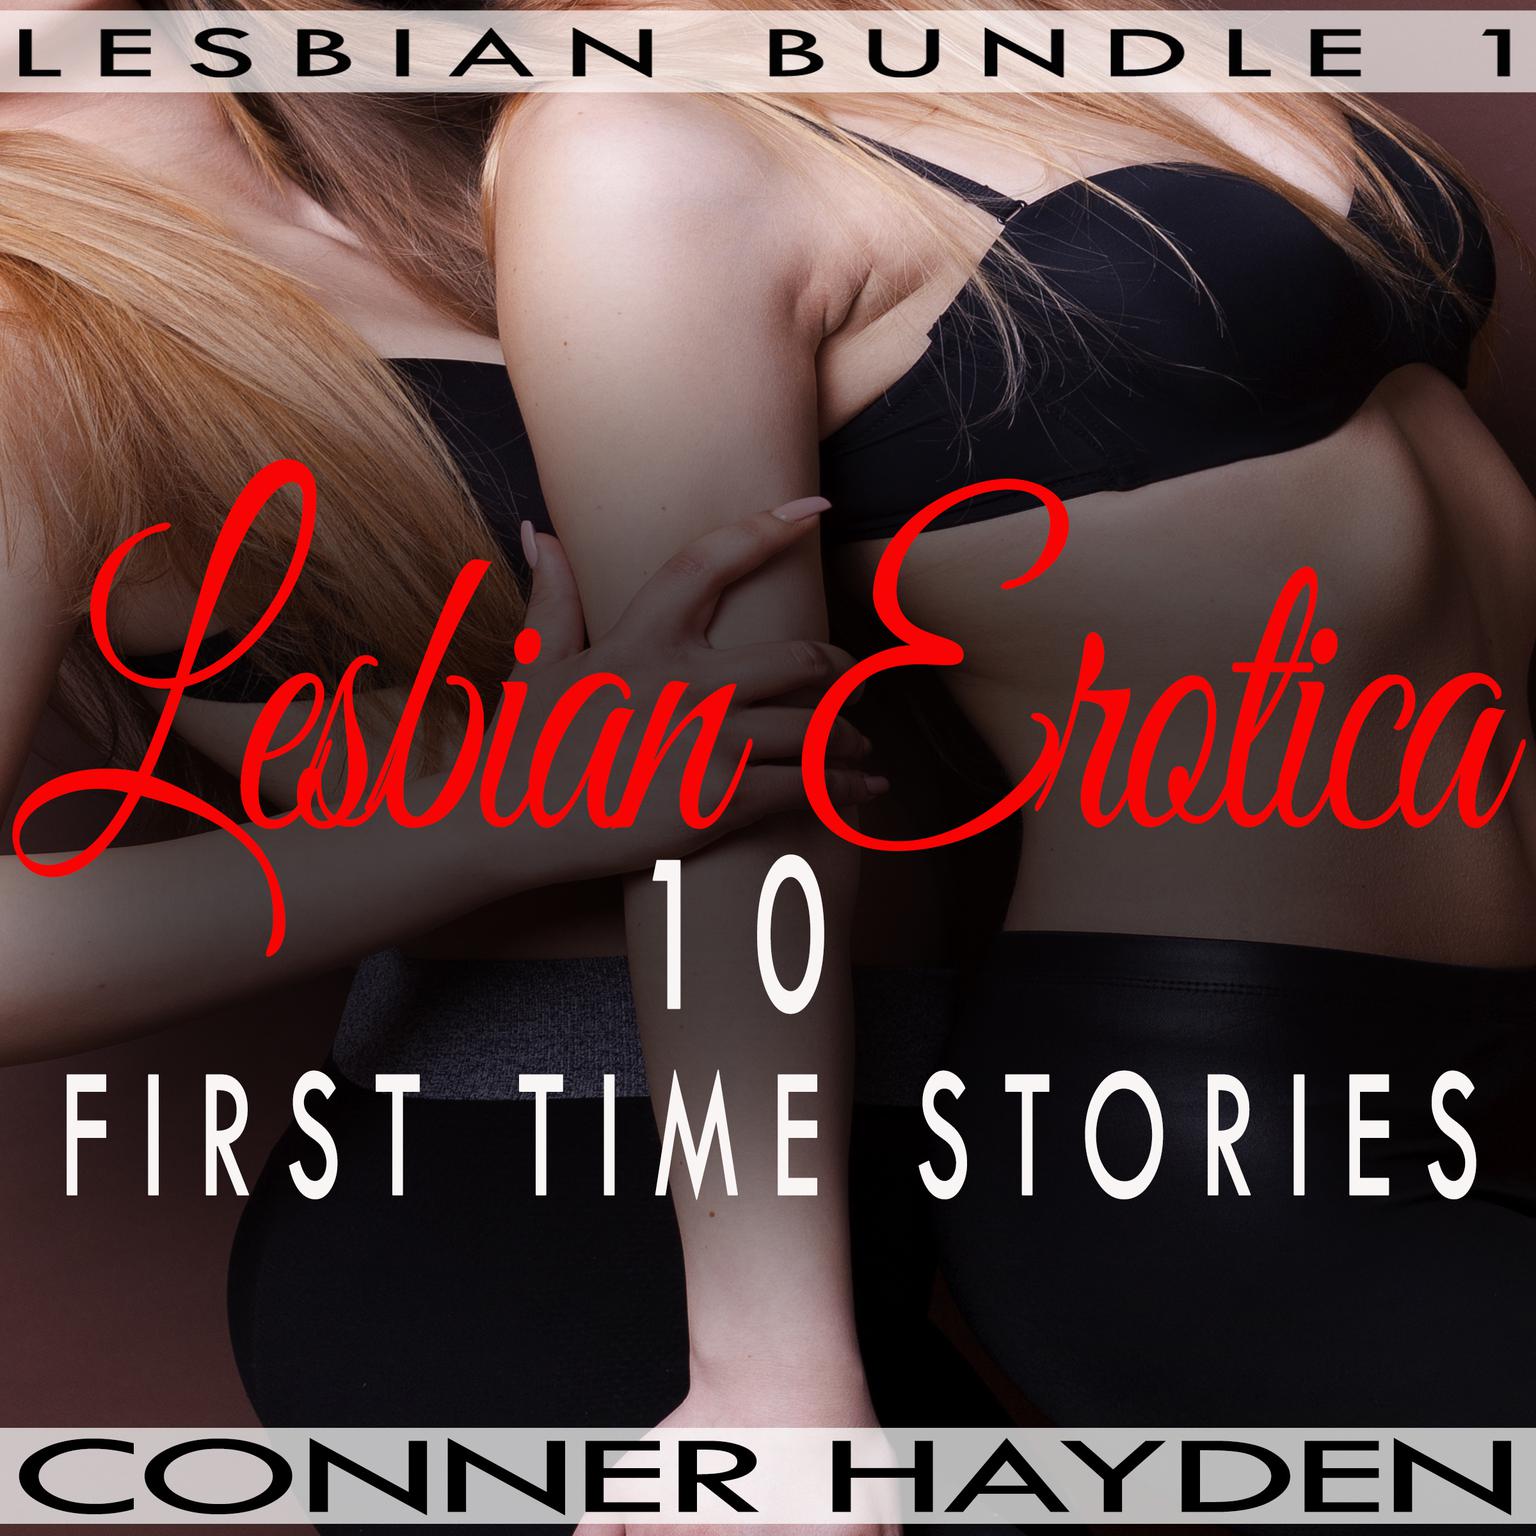 Lesbian Erotica – 10 First Time Stories (Lesbian Bundle) Audiobook, by Conner Hayden